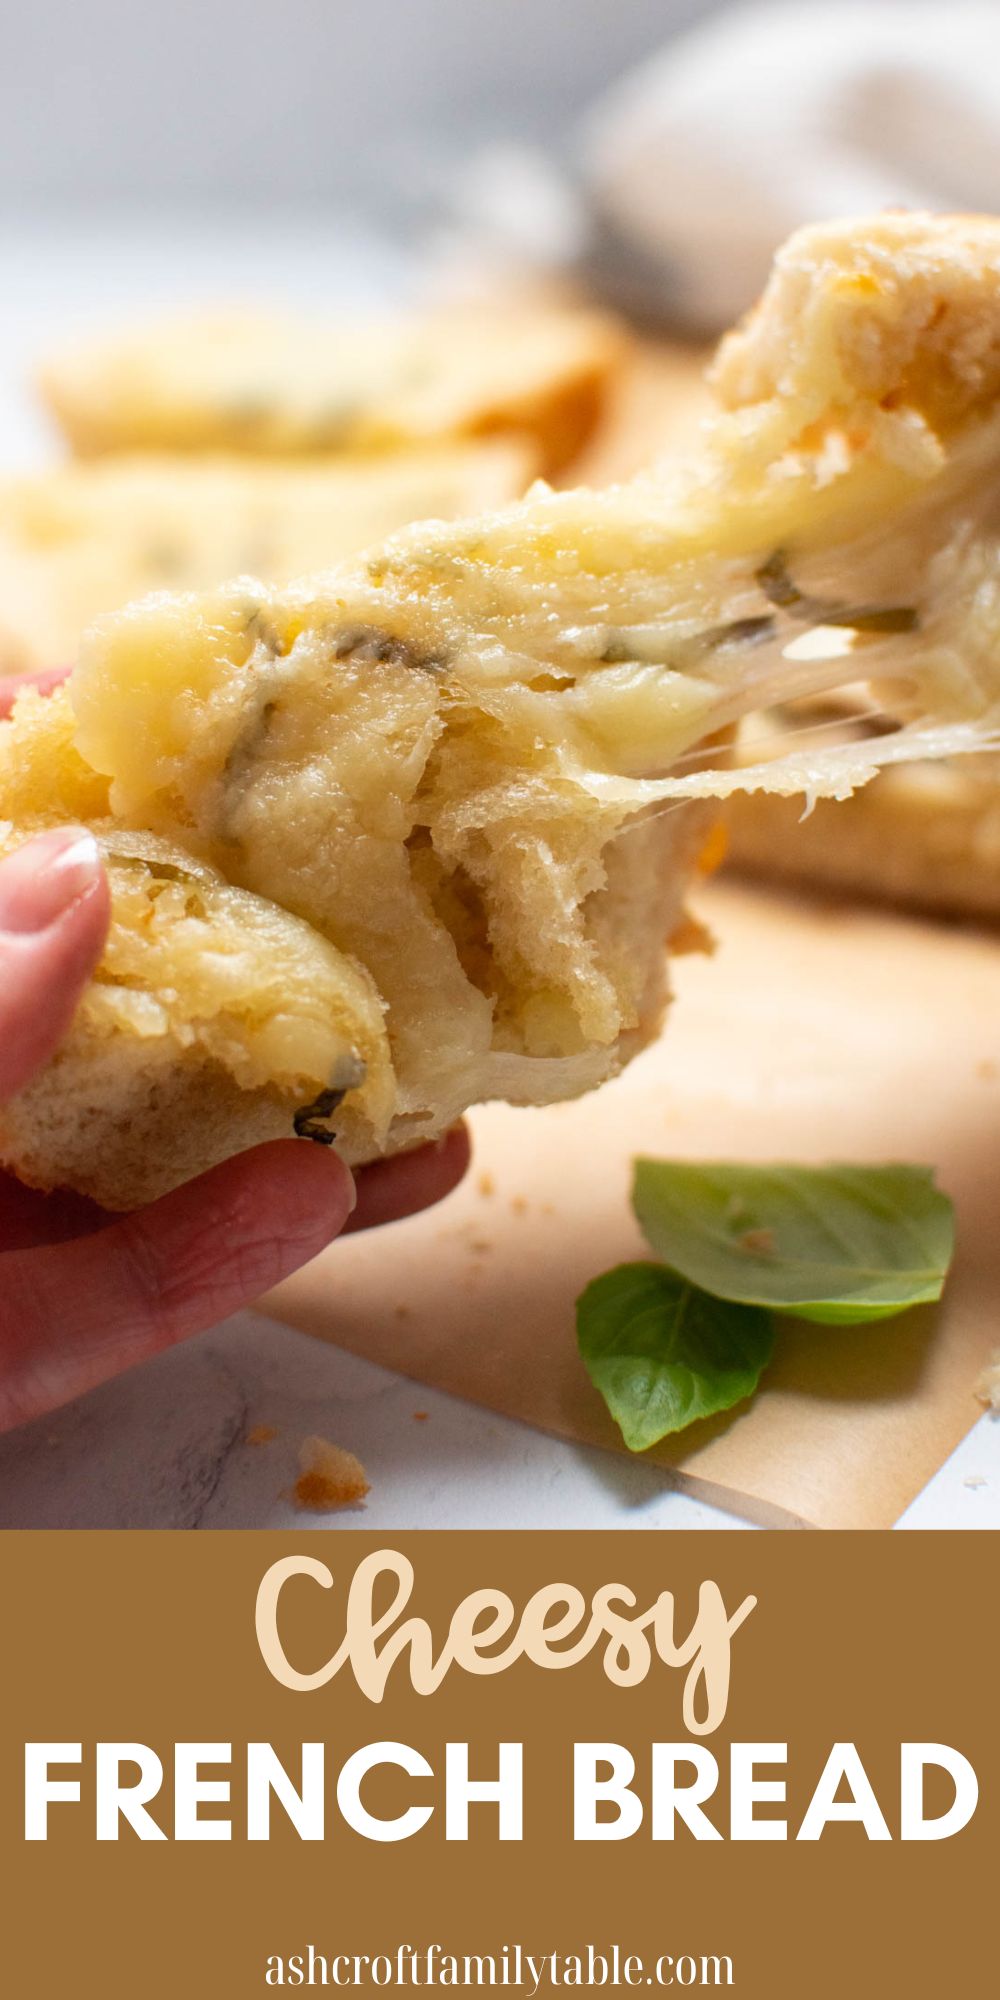 Pinterest graphic with text and photo of woman pulling apart piece of cheesy French bread.